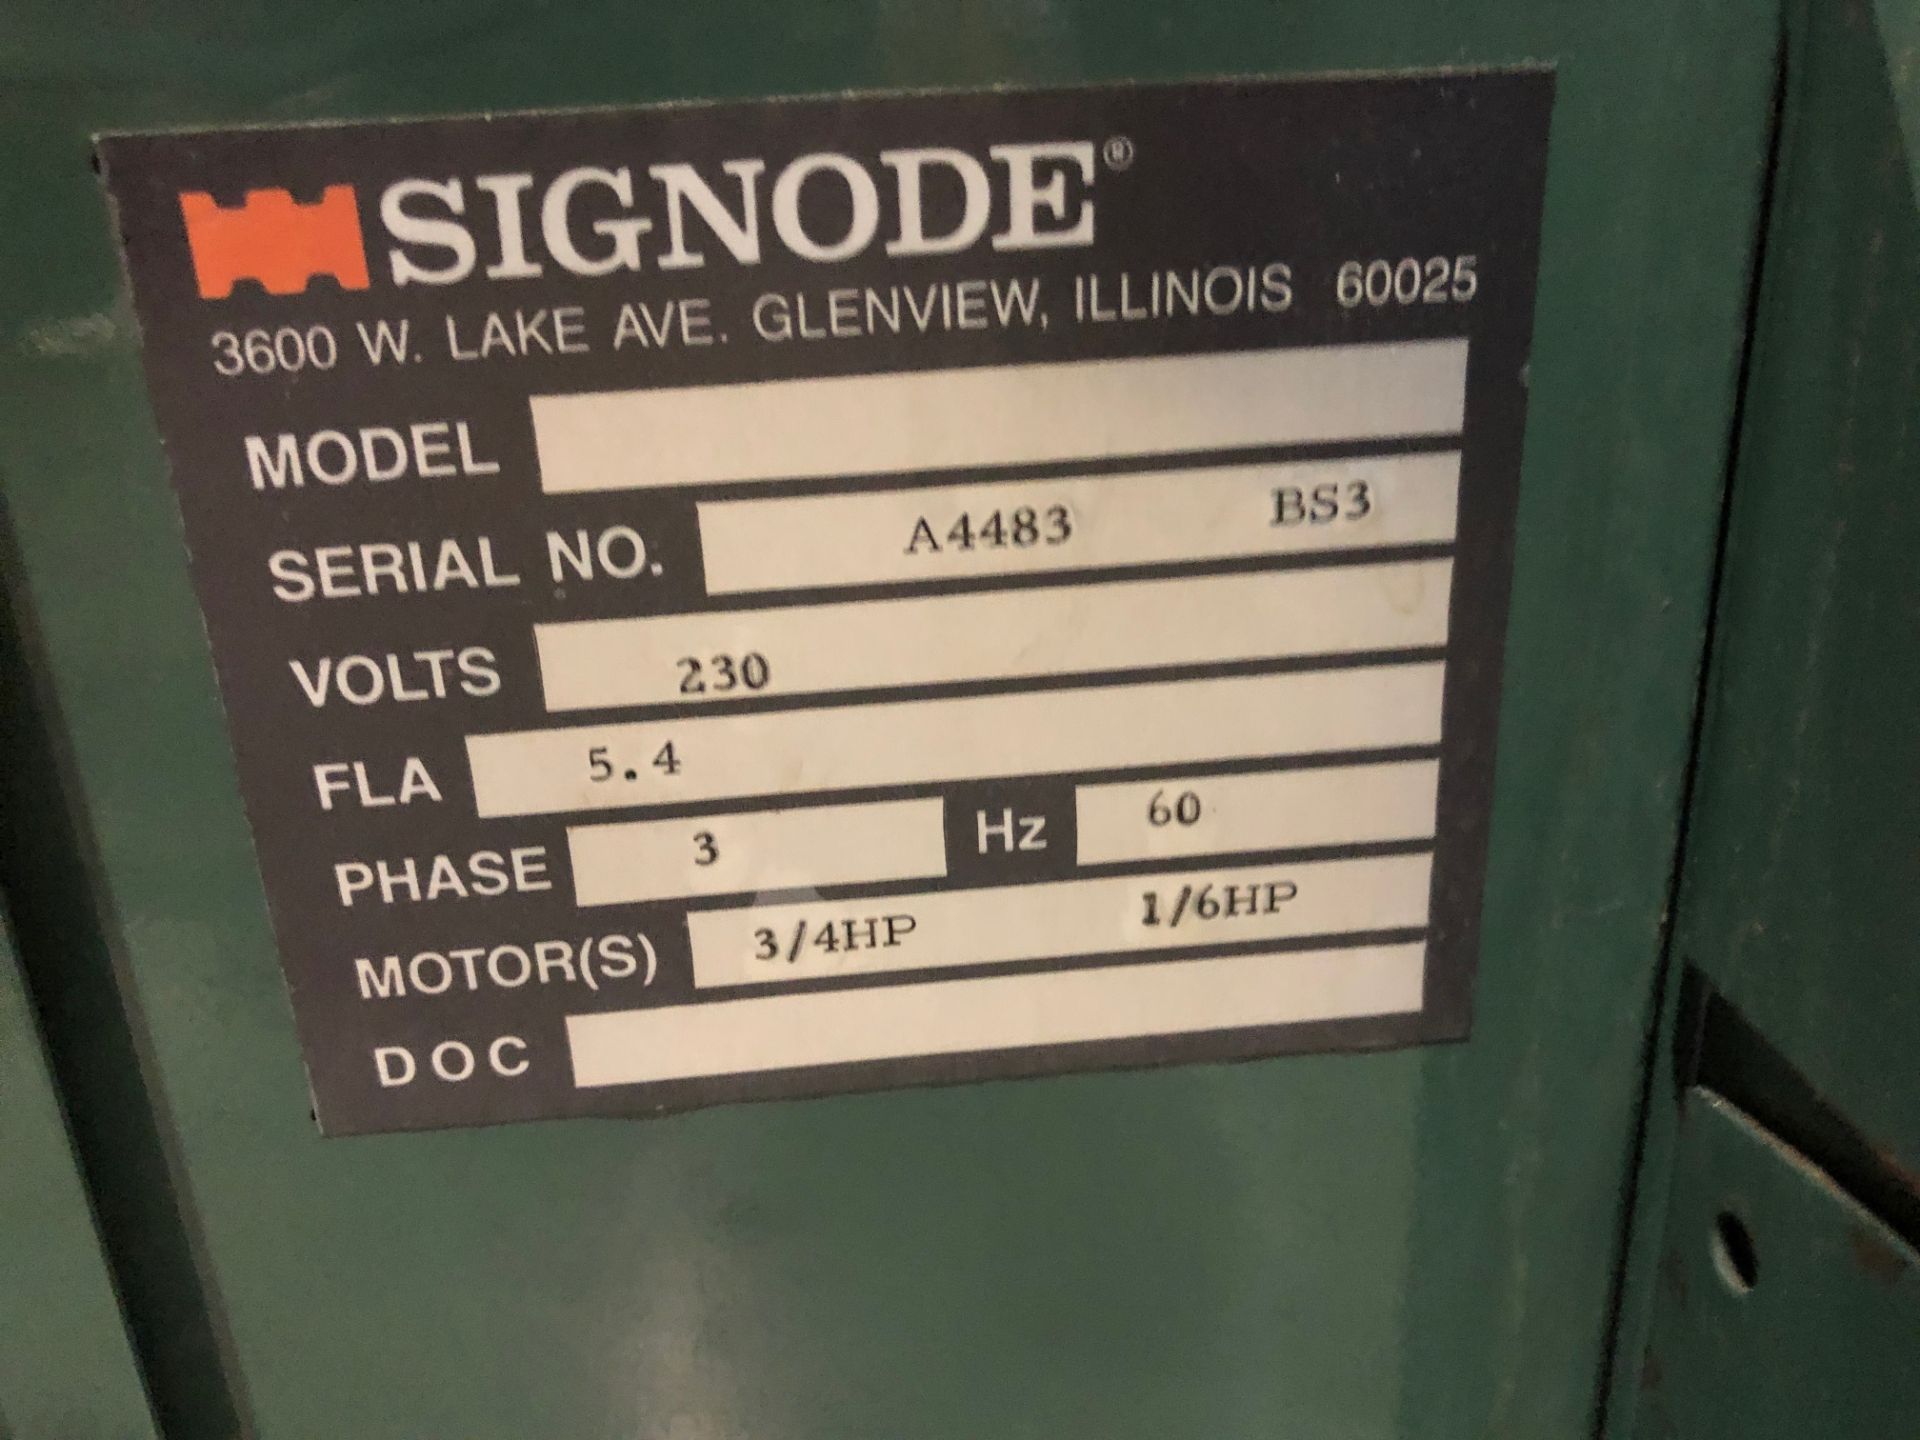 Signode Spirit Strapping Machine S/N A4483 BS3, RIGGING FEE $125 - Image 3 of 3